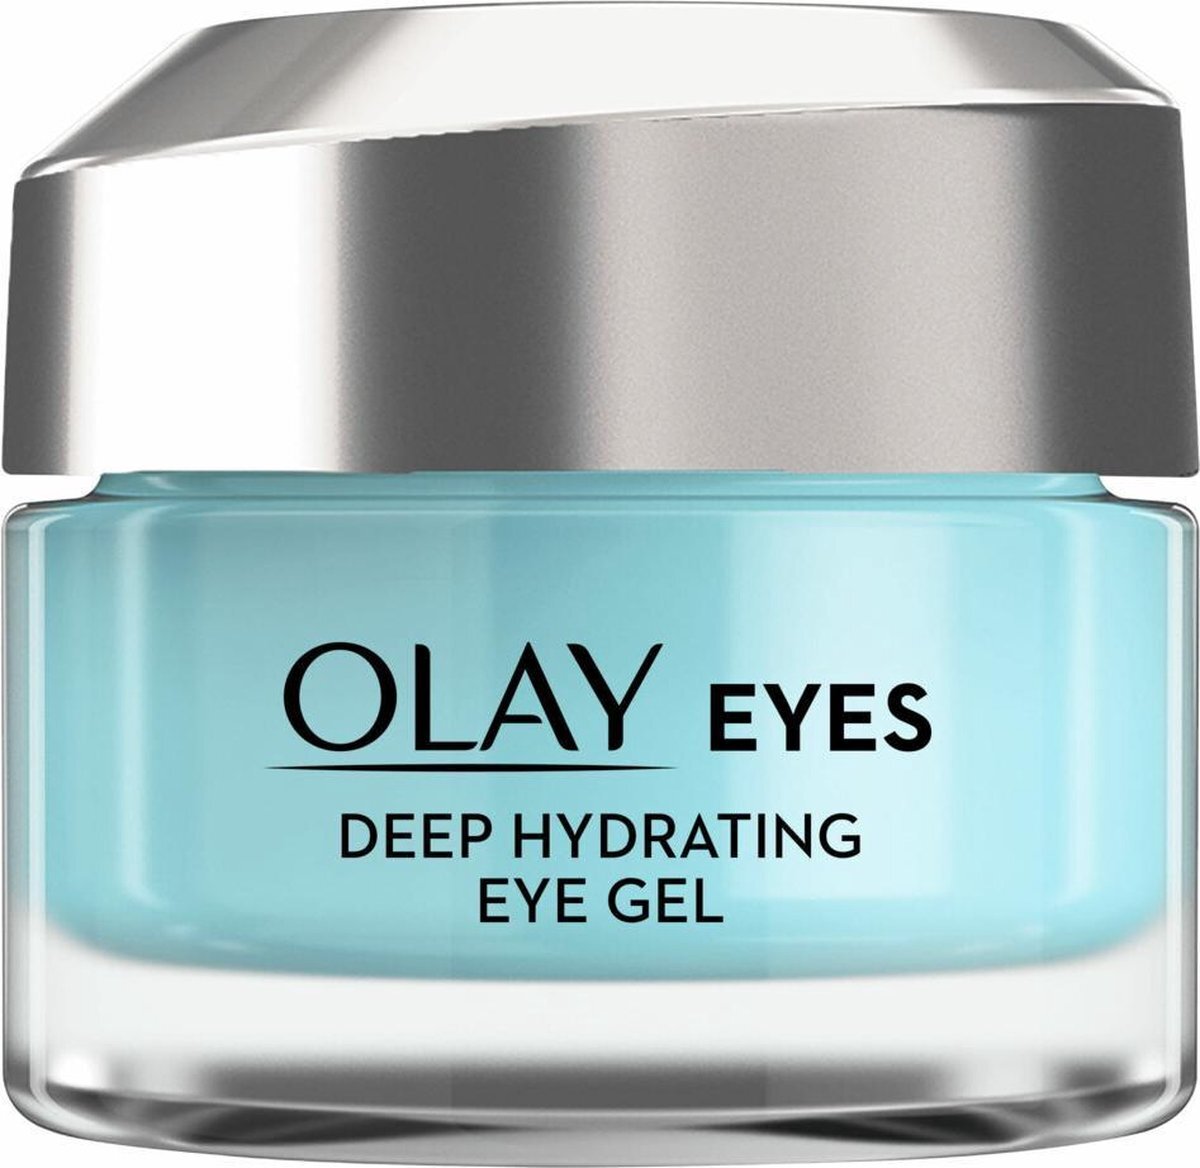 Olay Eyes Intens Hydraterende Oogcontourgel